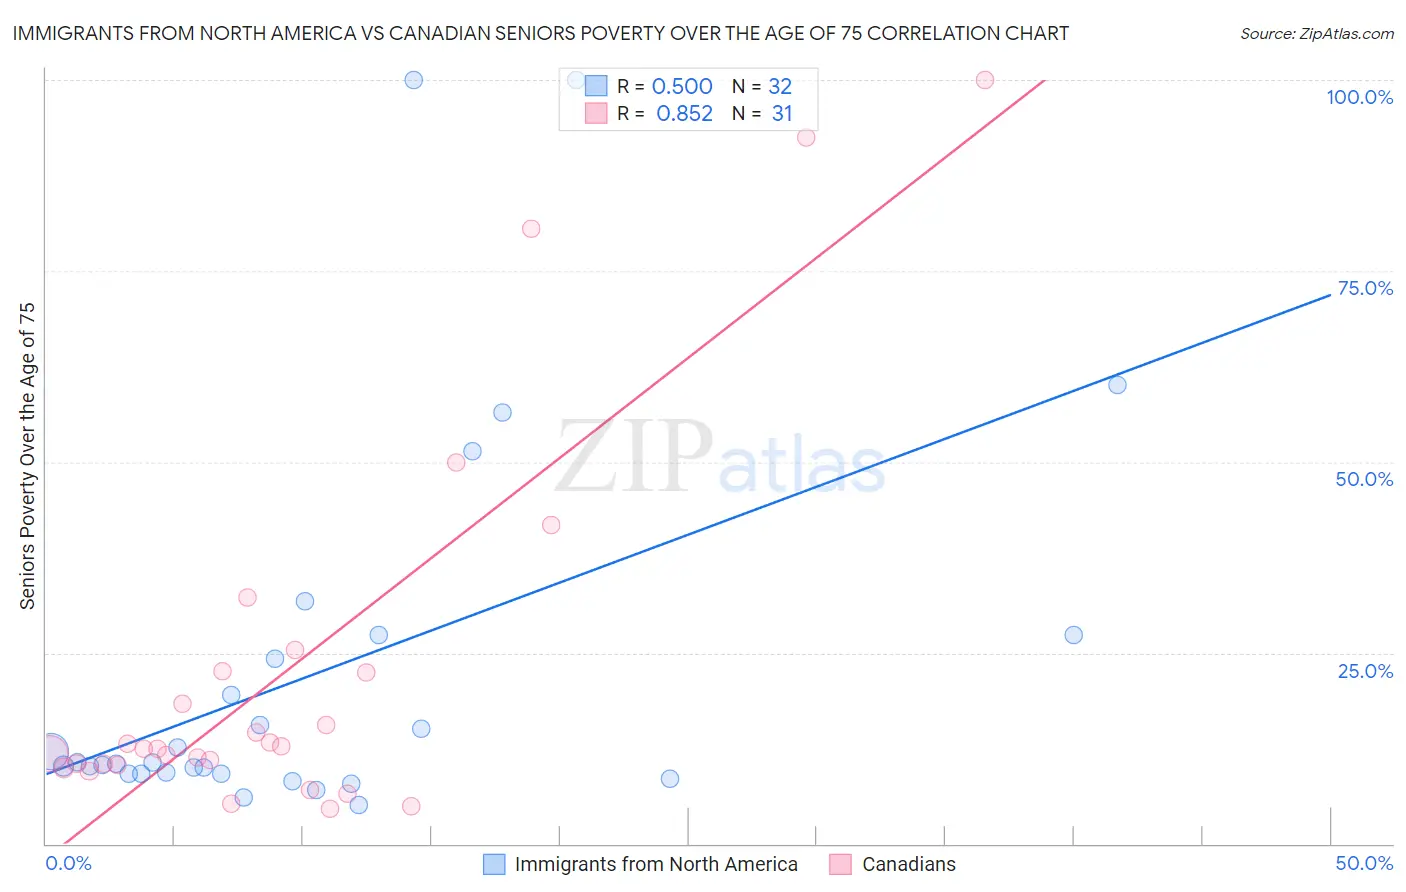 Immigrants from North America vs Canadian Seniors Poverty Over the Age of 75